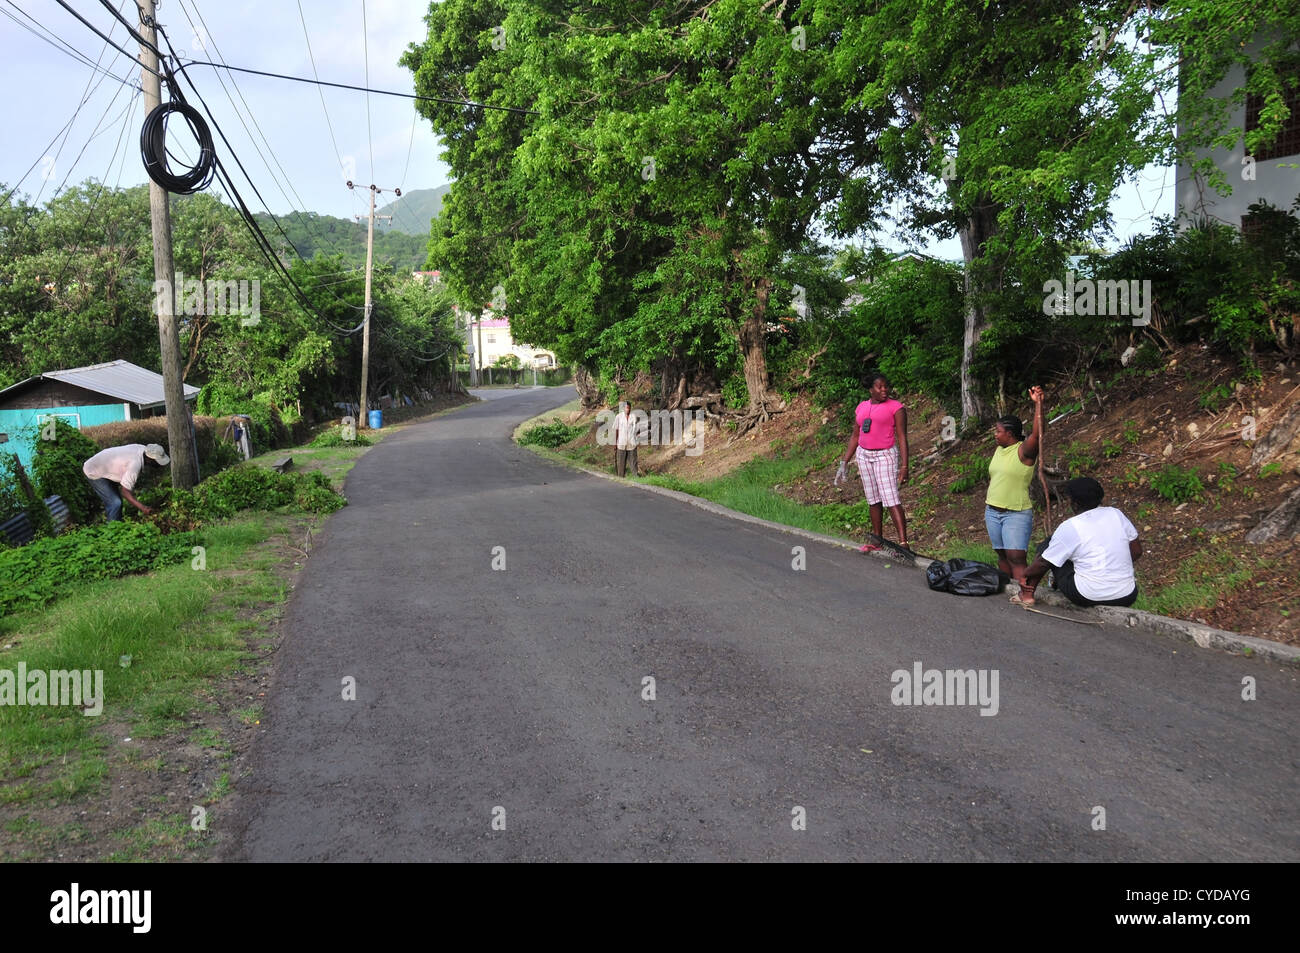 Morning sun view West Indian men women weeding, cleaning green road verges, Belair Road at Hillsborough, Carriacou, West Indies Stock Photo